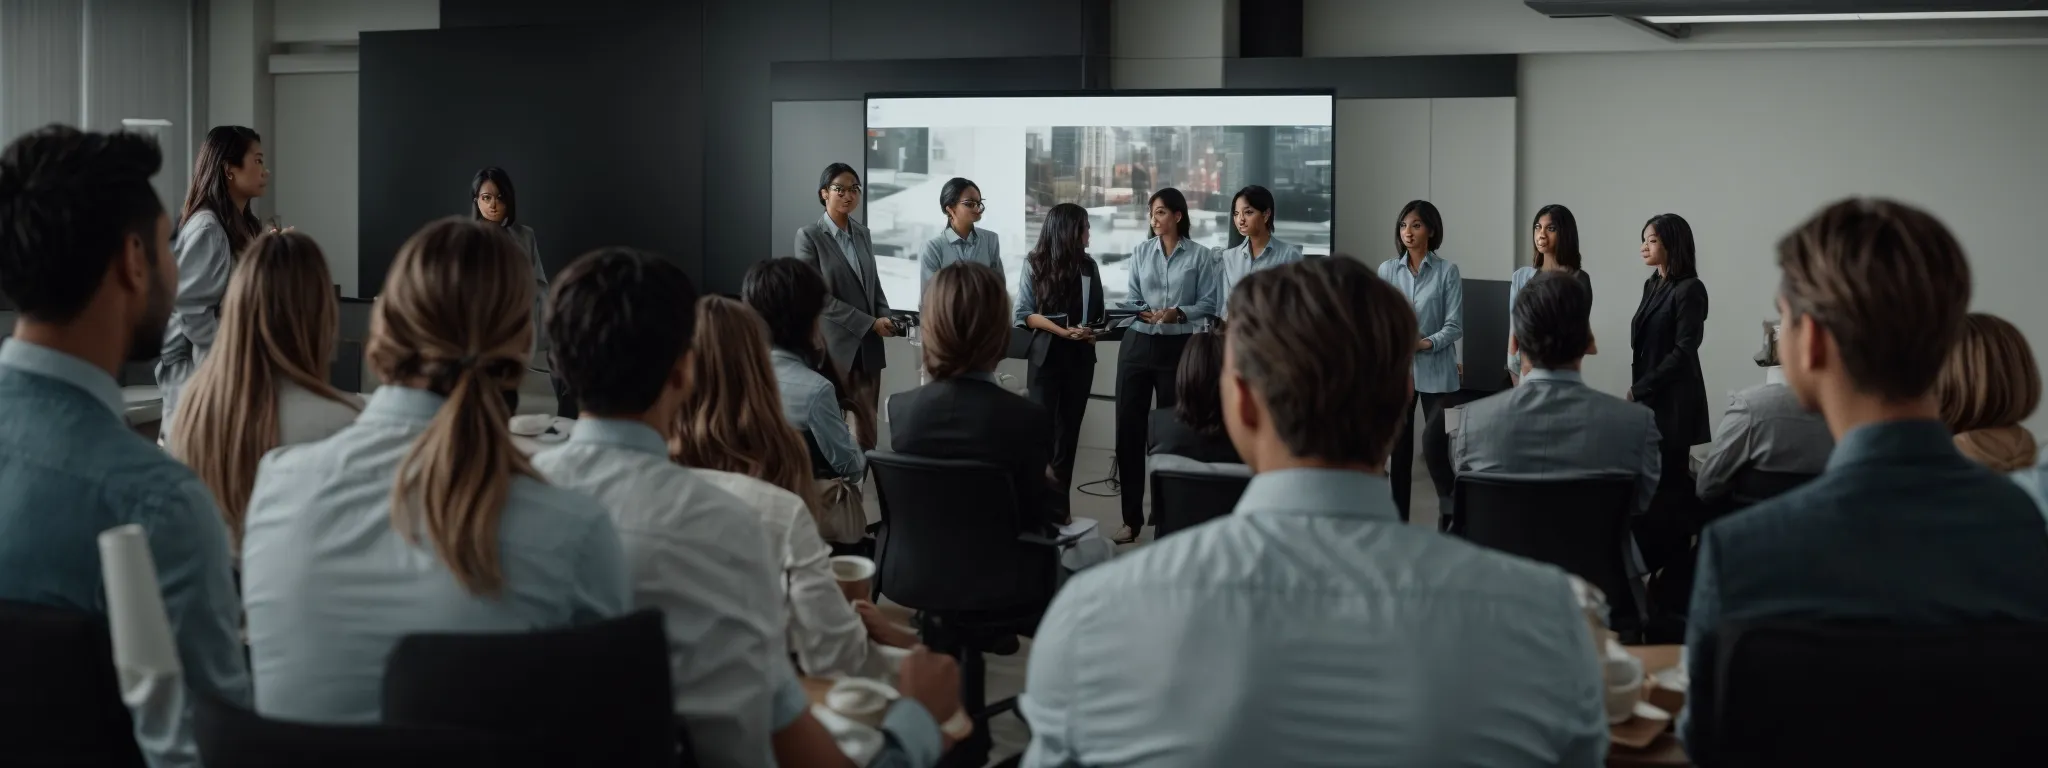 a diverse group of professionals is gathered around a large digital screen, actively engaging in a collaborative session with virtual participants.